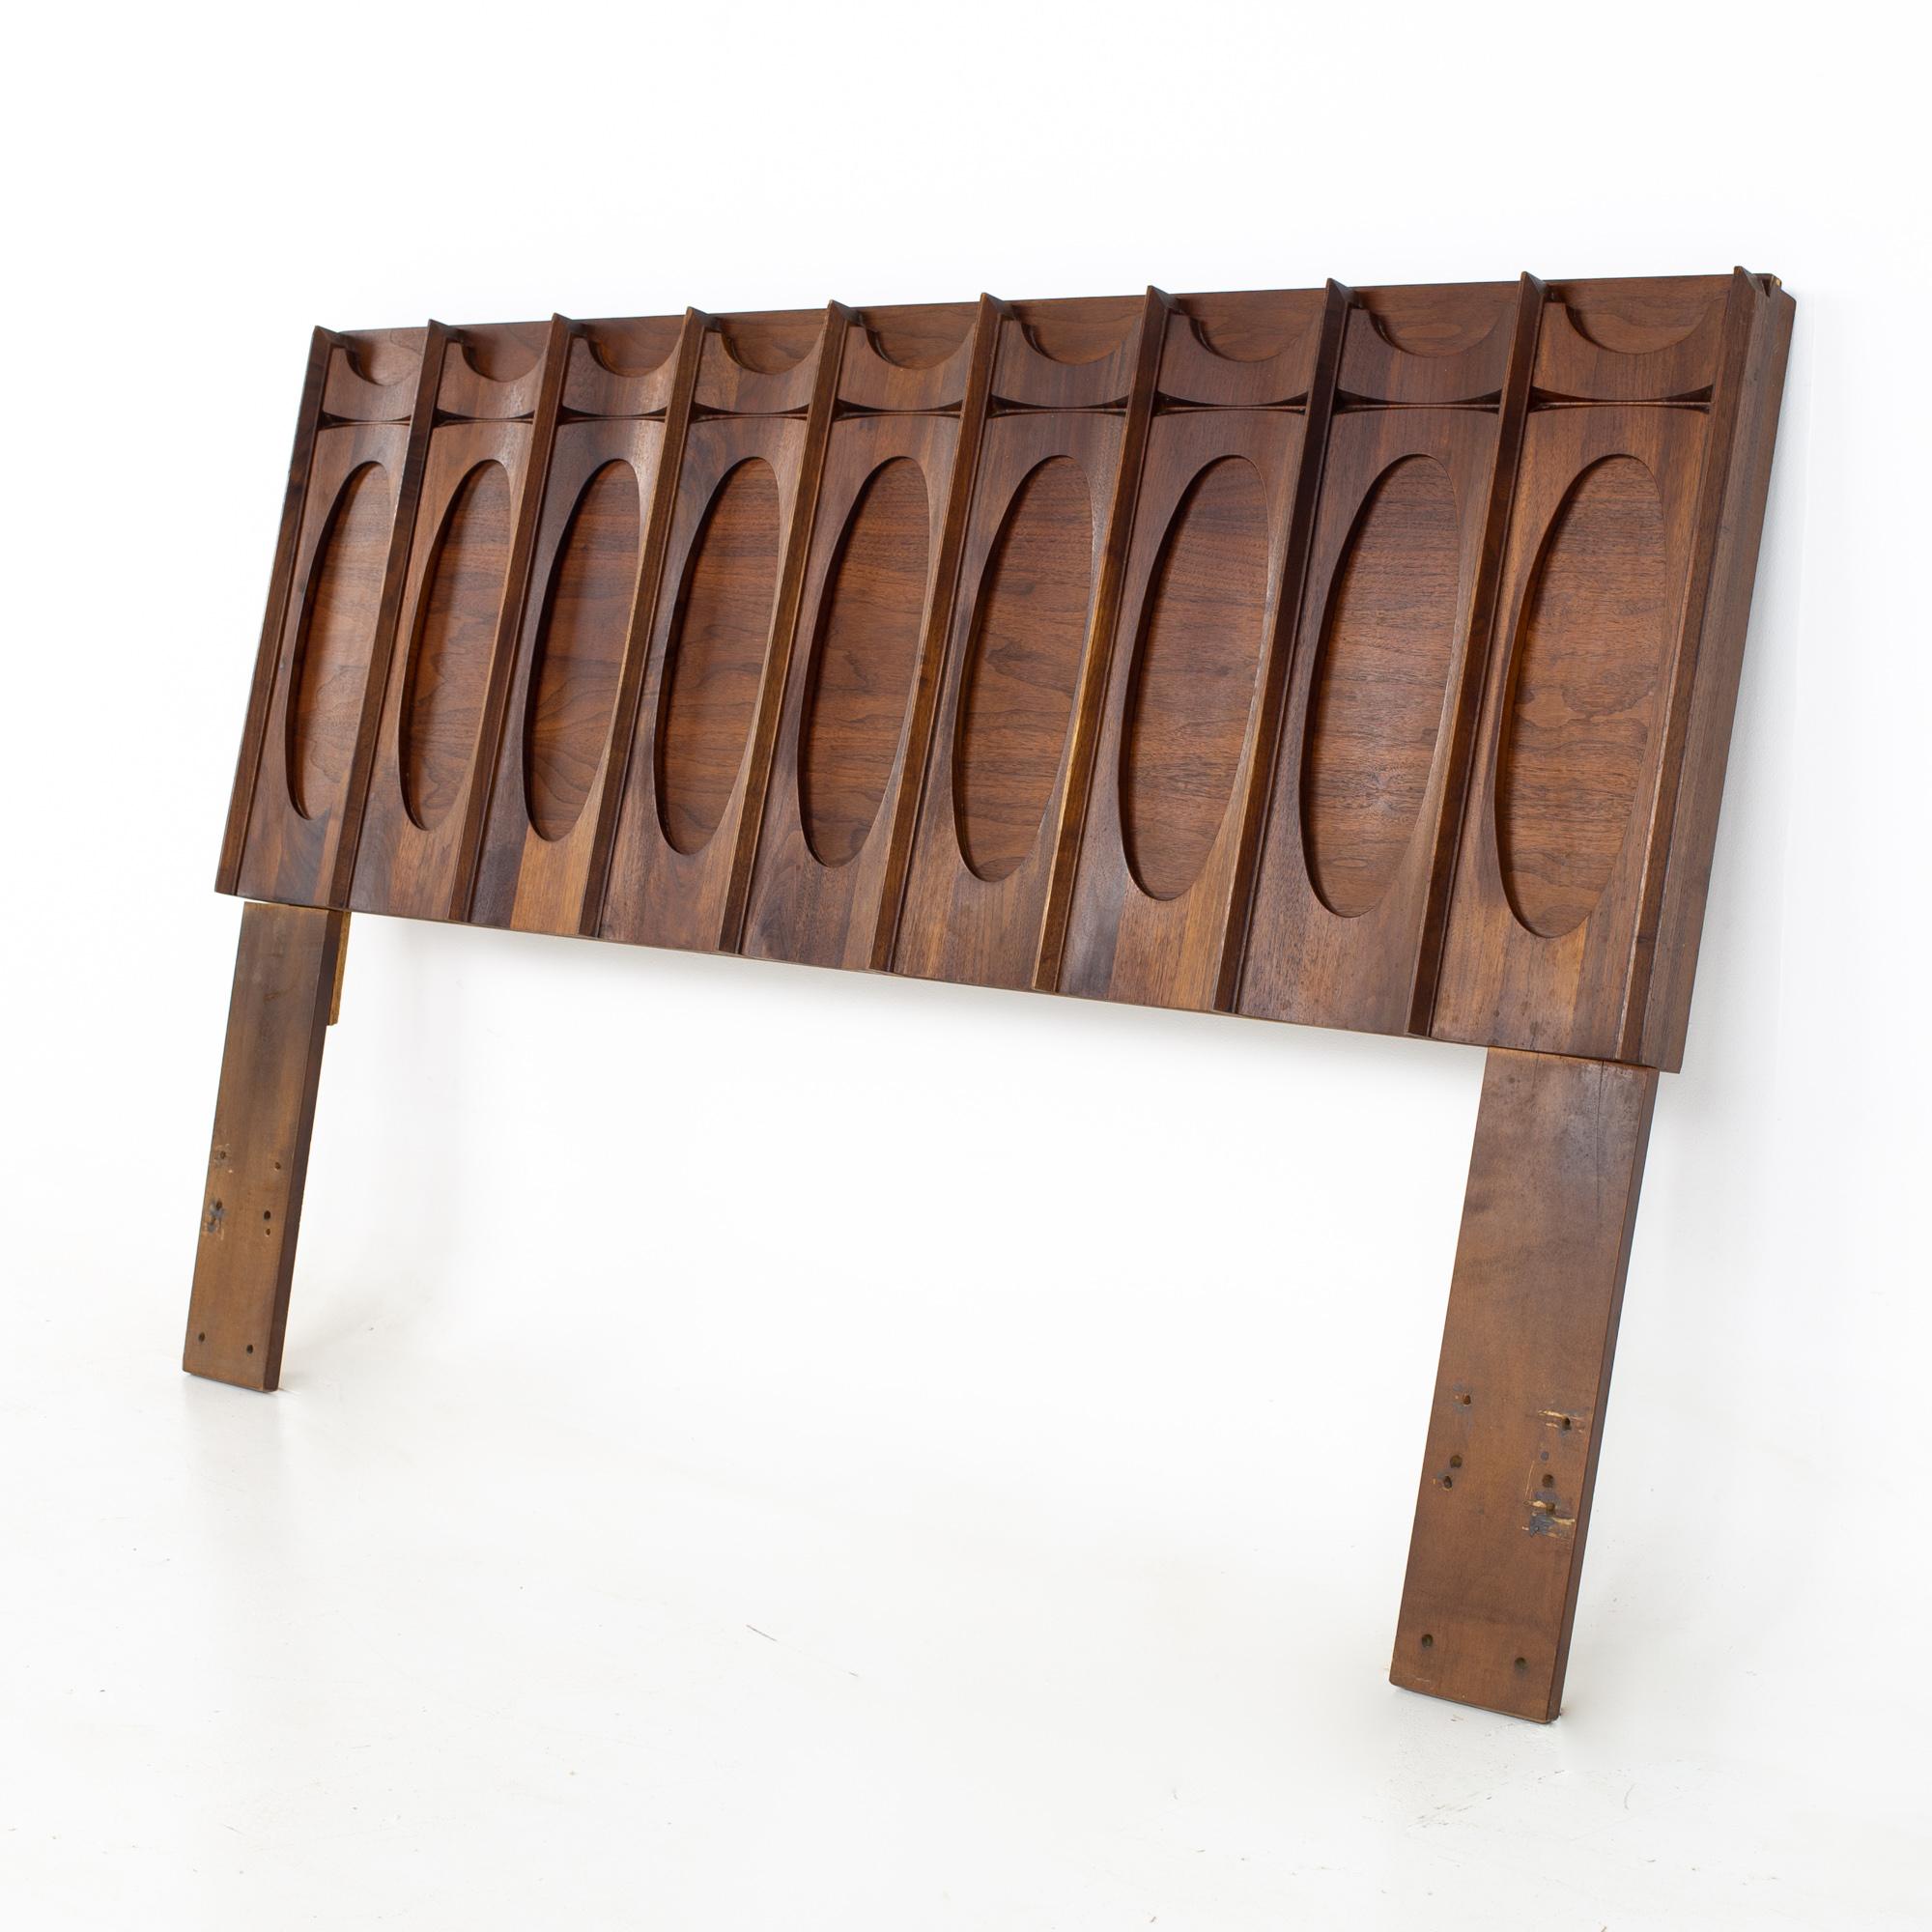 Tobago Canadian Brutalist mid century headboard.
Headboard measures: 60 wide x 3.5 deep x 40.5 inches high

All pieces of furniture can be had in what we call restored vintage condition. That means the piece is restored upon purchase so it’s free